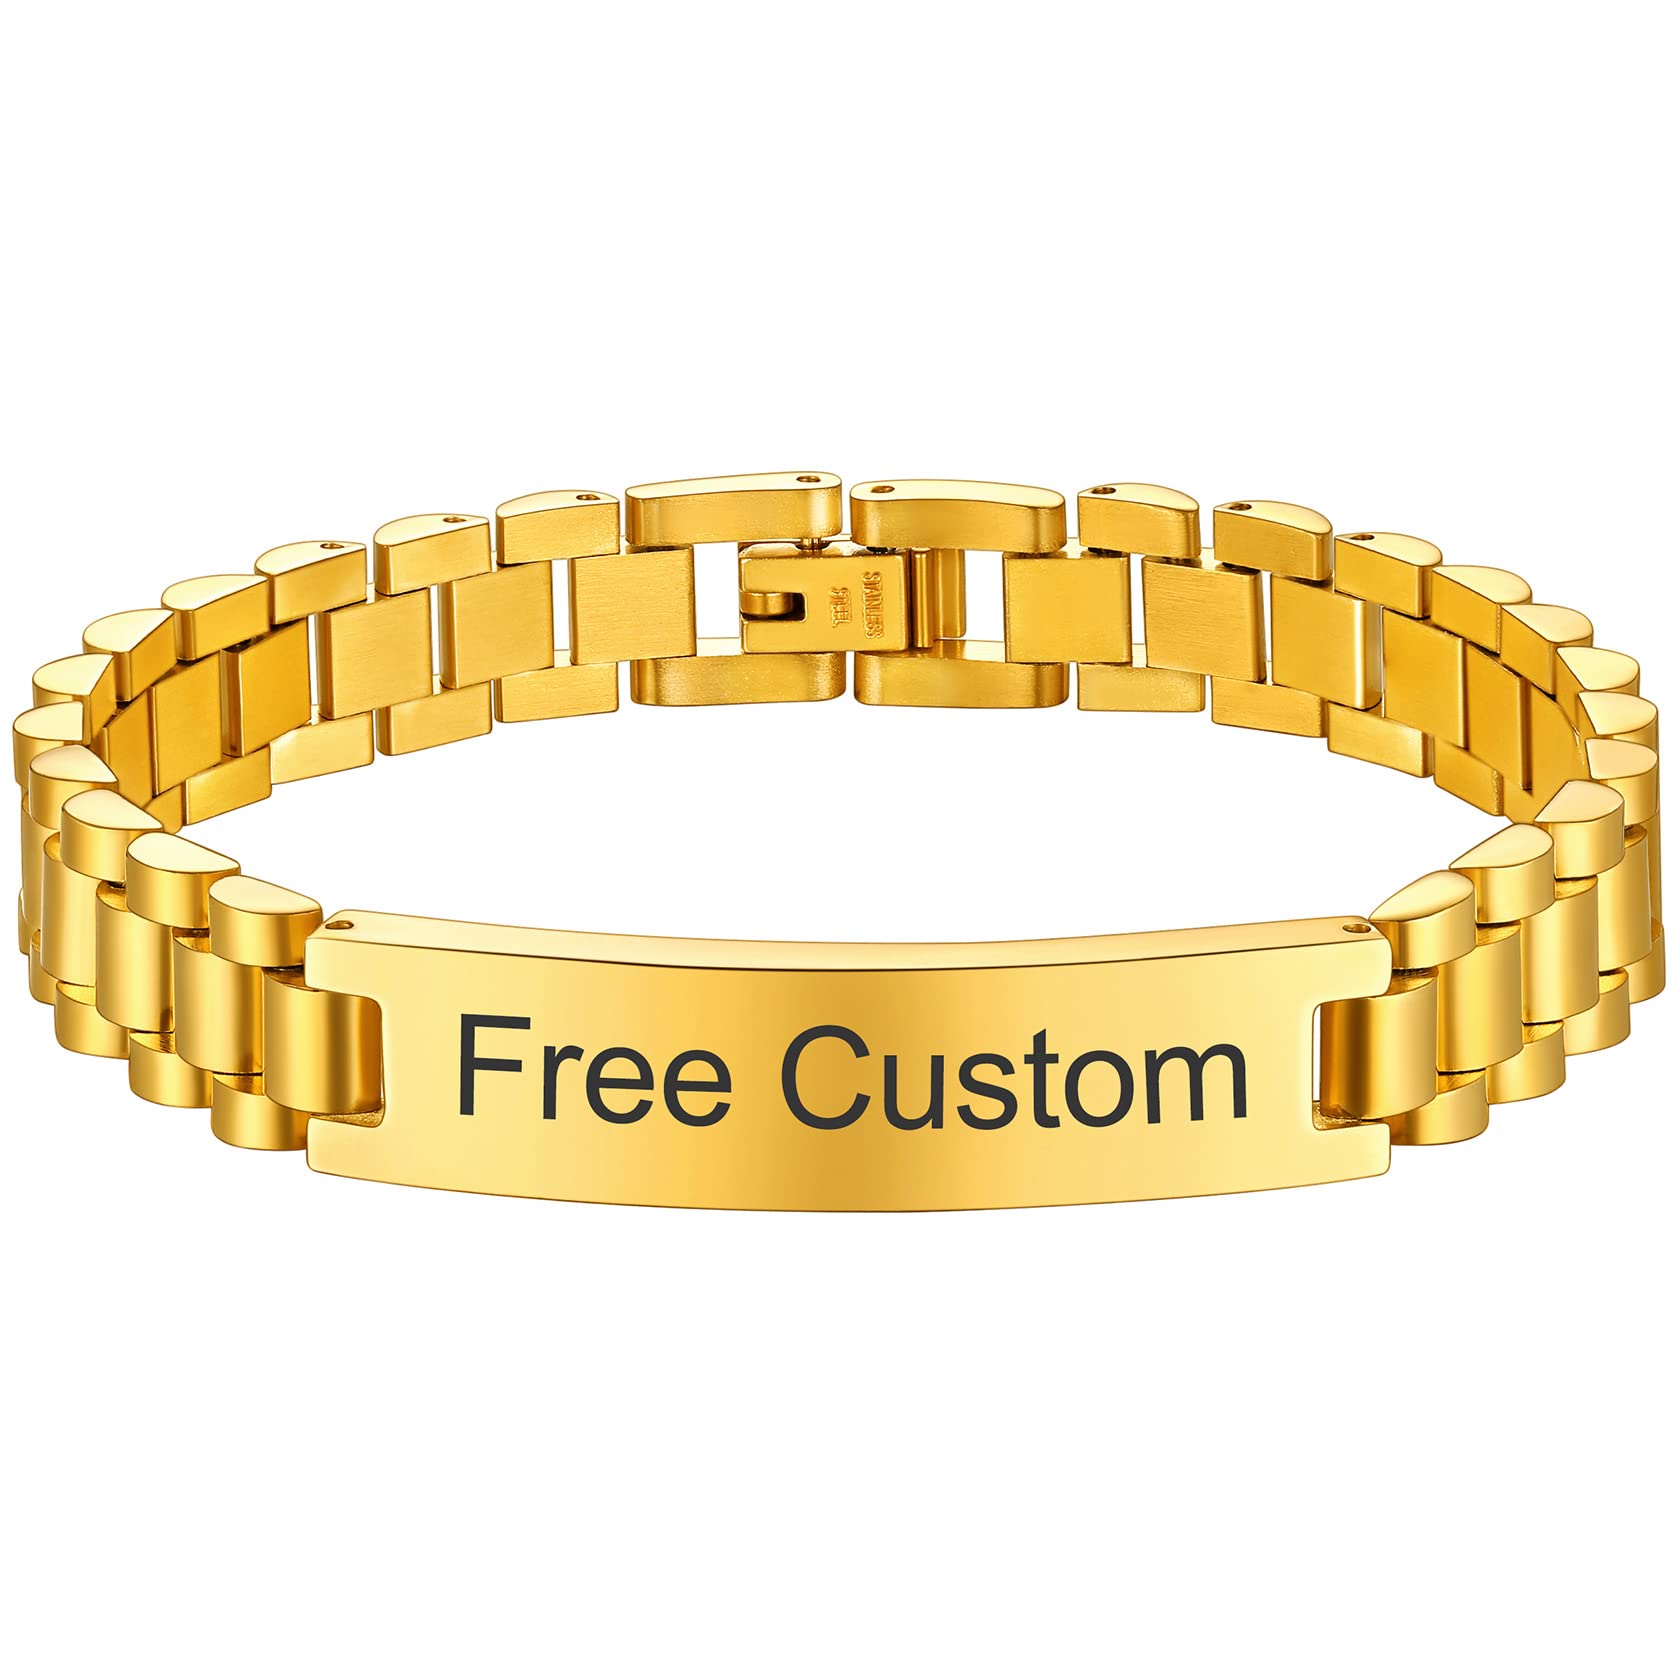 ChainsHouse Wristband ID Bracelets for Men, Stainless Steel/18K Gold/Black Metal Plated, Personalized Engrave Chunky Bracelet Bangle, with Removal Tool, 15MM/15.5MM Width, 8.27-8.66 Inch Length